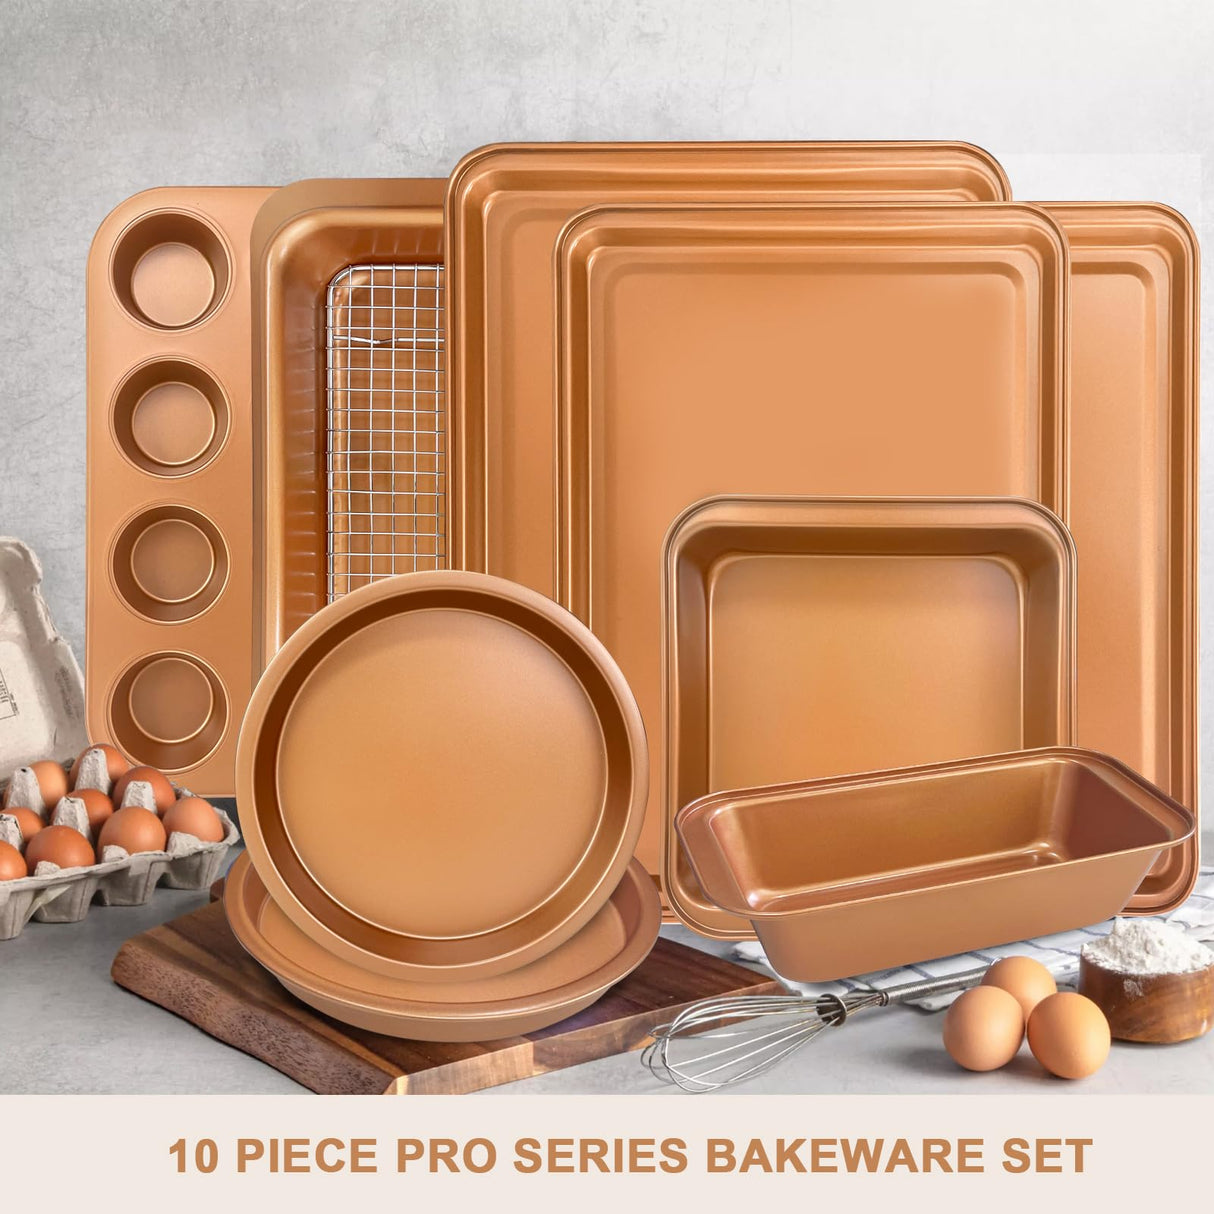 RavisingRidge Baking Pans Set with Nonstick Coating, Professional 10 Pcs Including Cake Pans, Cookie Sheets, Roasting Pan, and Cooling Rack - 0.8mm Thick, Dishwasher Safe, and Heavy Duty